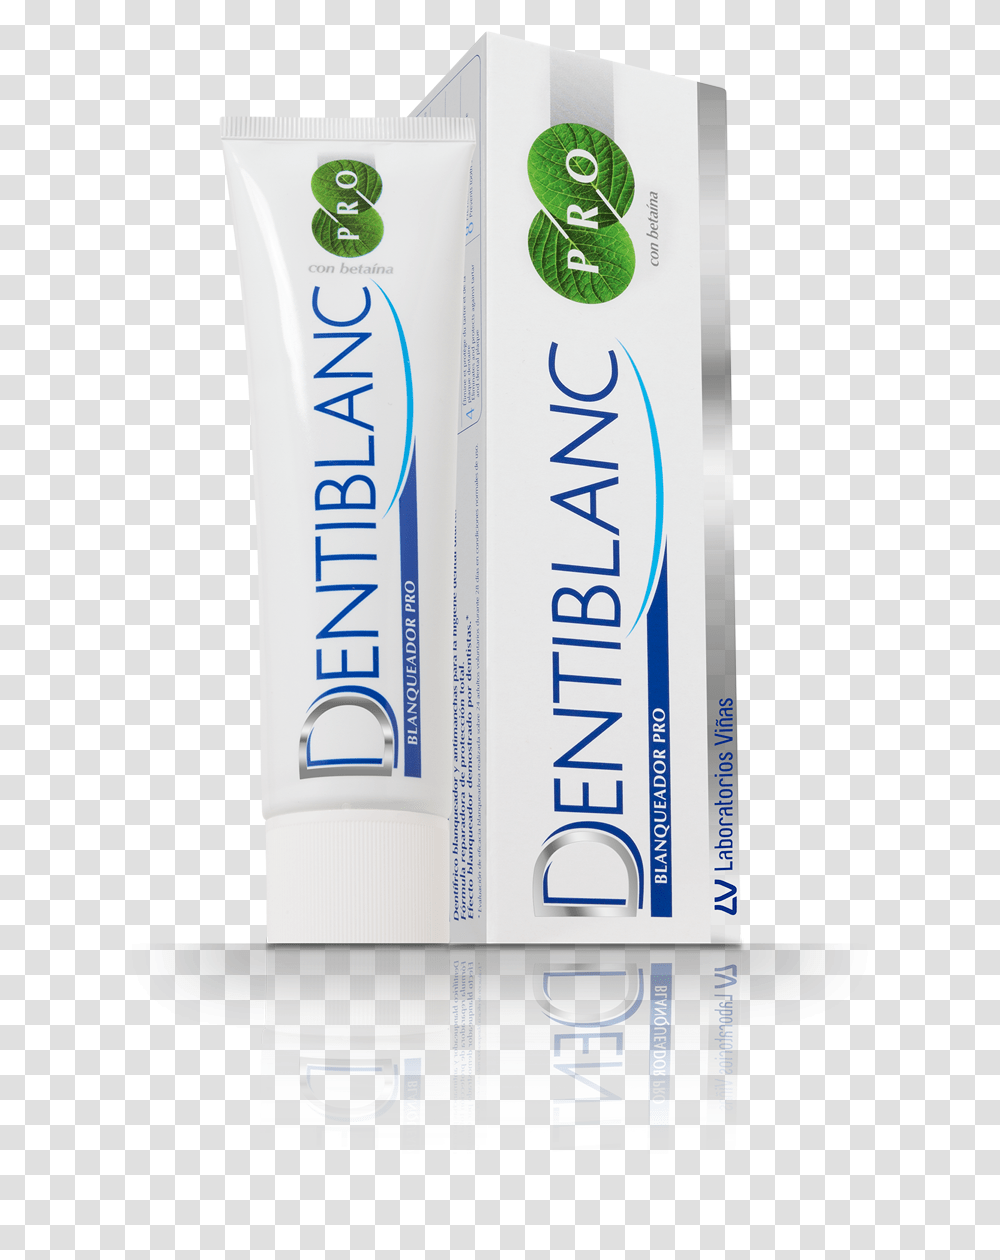 Dentiblanc Extrafresh Pasta Dentfrica Duplo 2 X 100ml Packaging And Labeling, Toothpaste Transparent Png